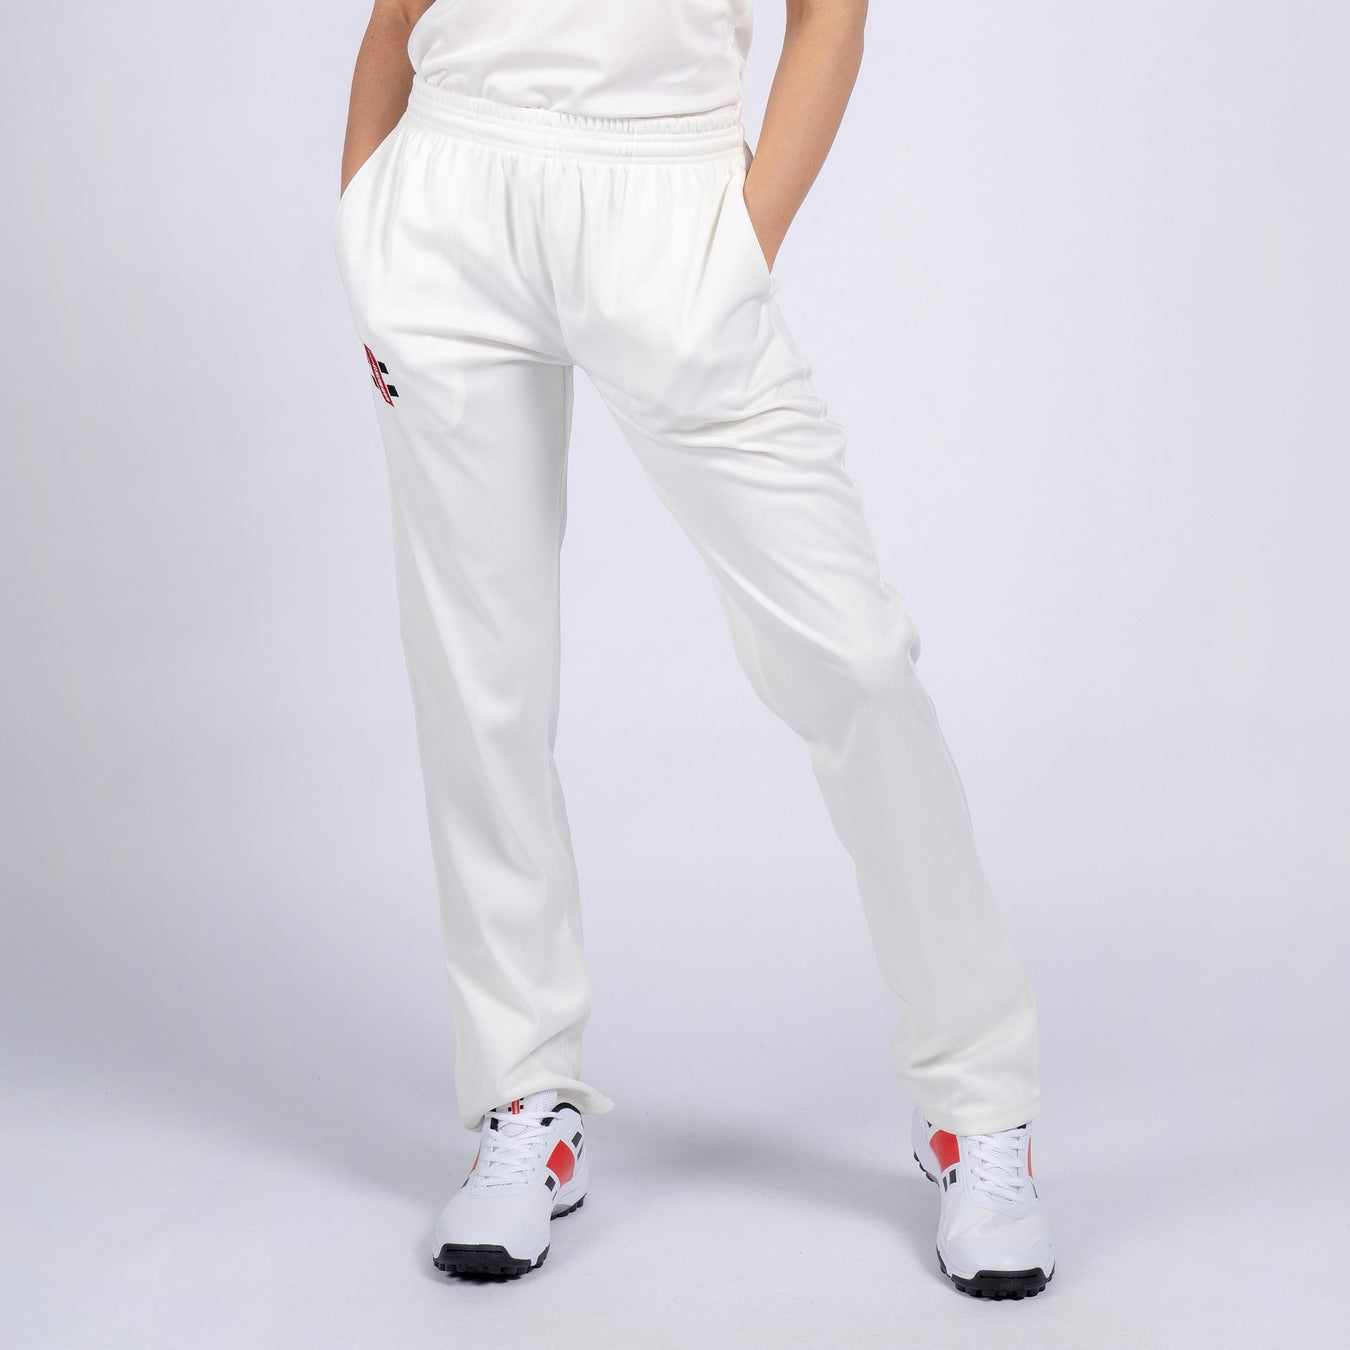 CCBG22Clothing Trousers Matrix V2 Ivory Ladies 3 Front